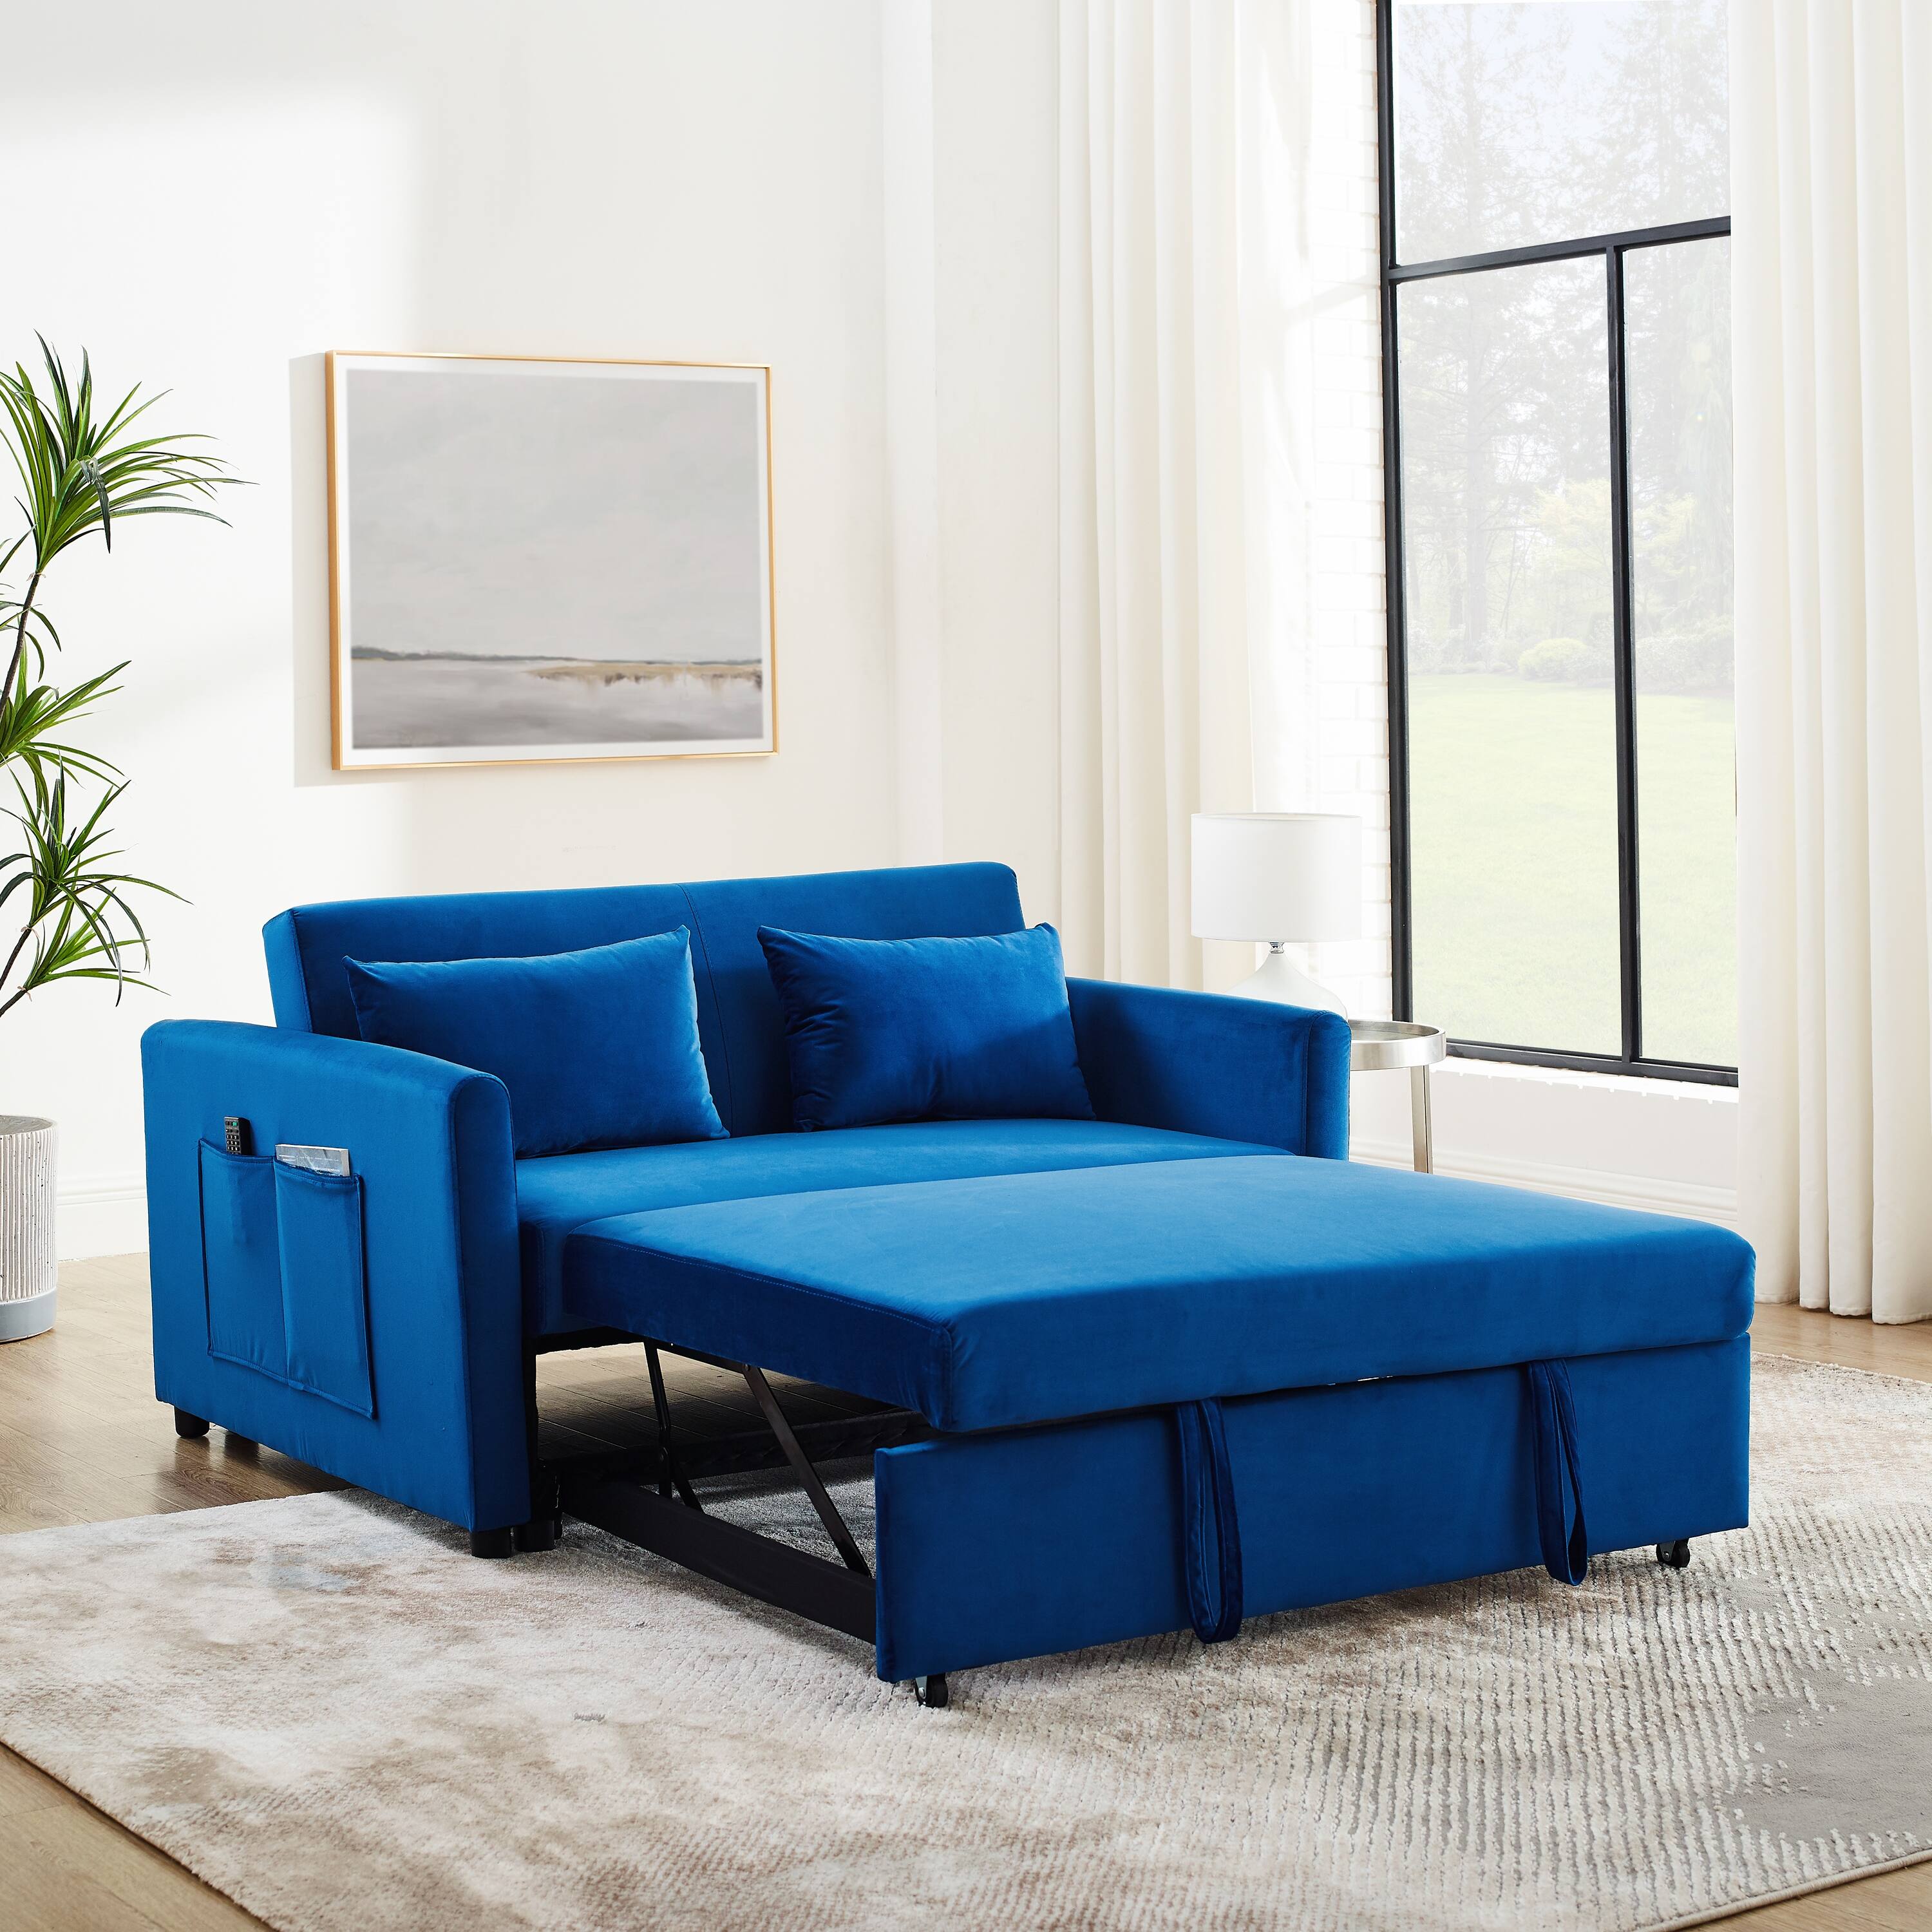 Convertible Sofa Bed, 3-in-1 Multi-Functional Velvet Sleeper Couch Pull ...